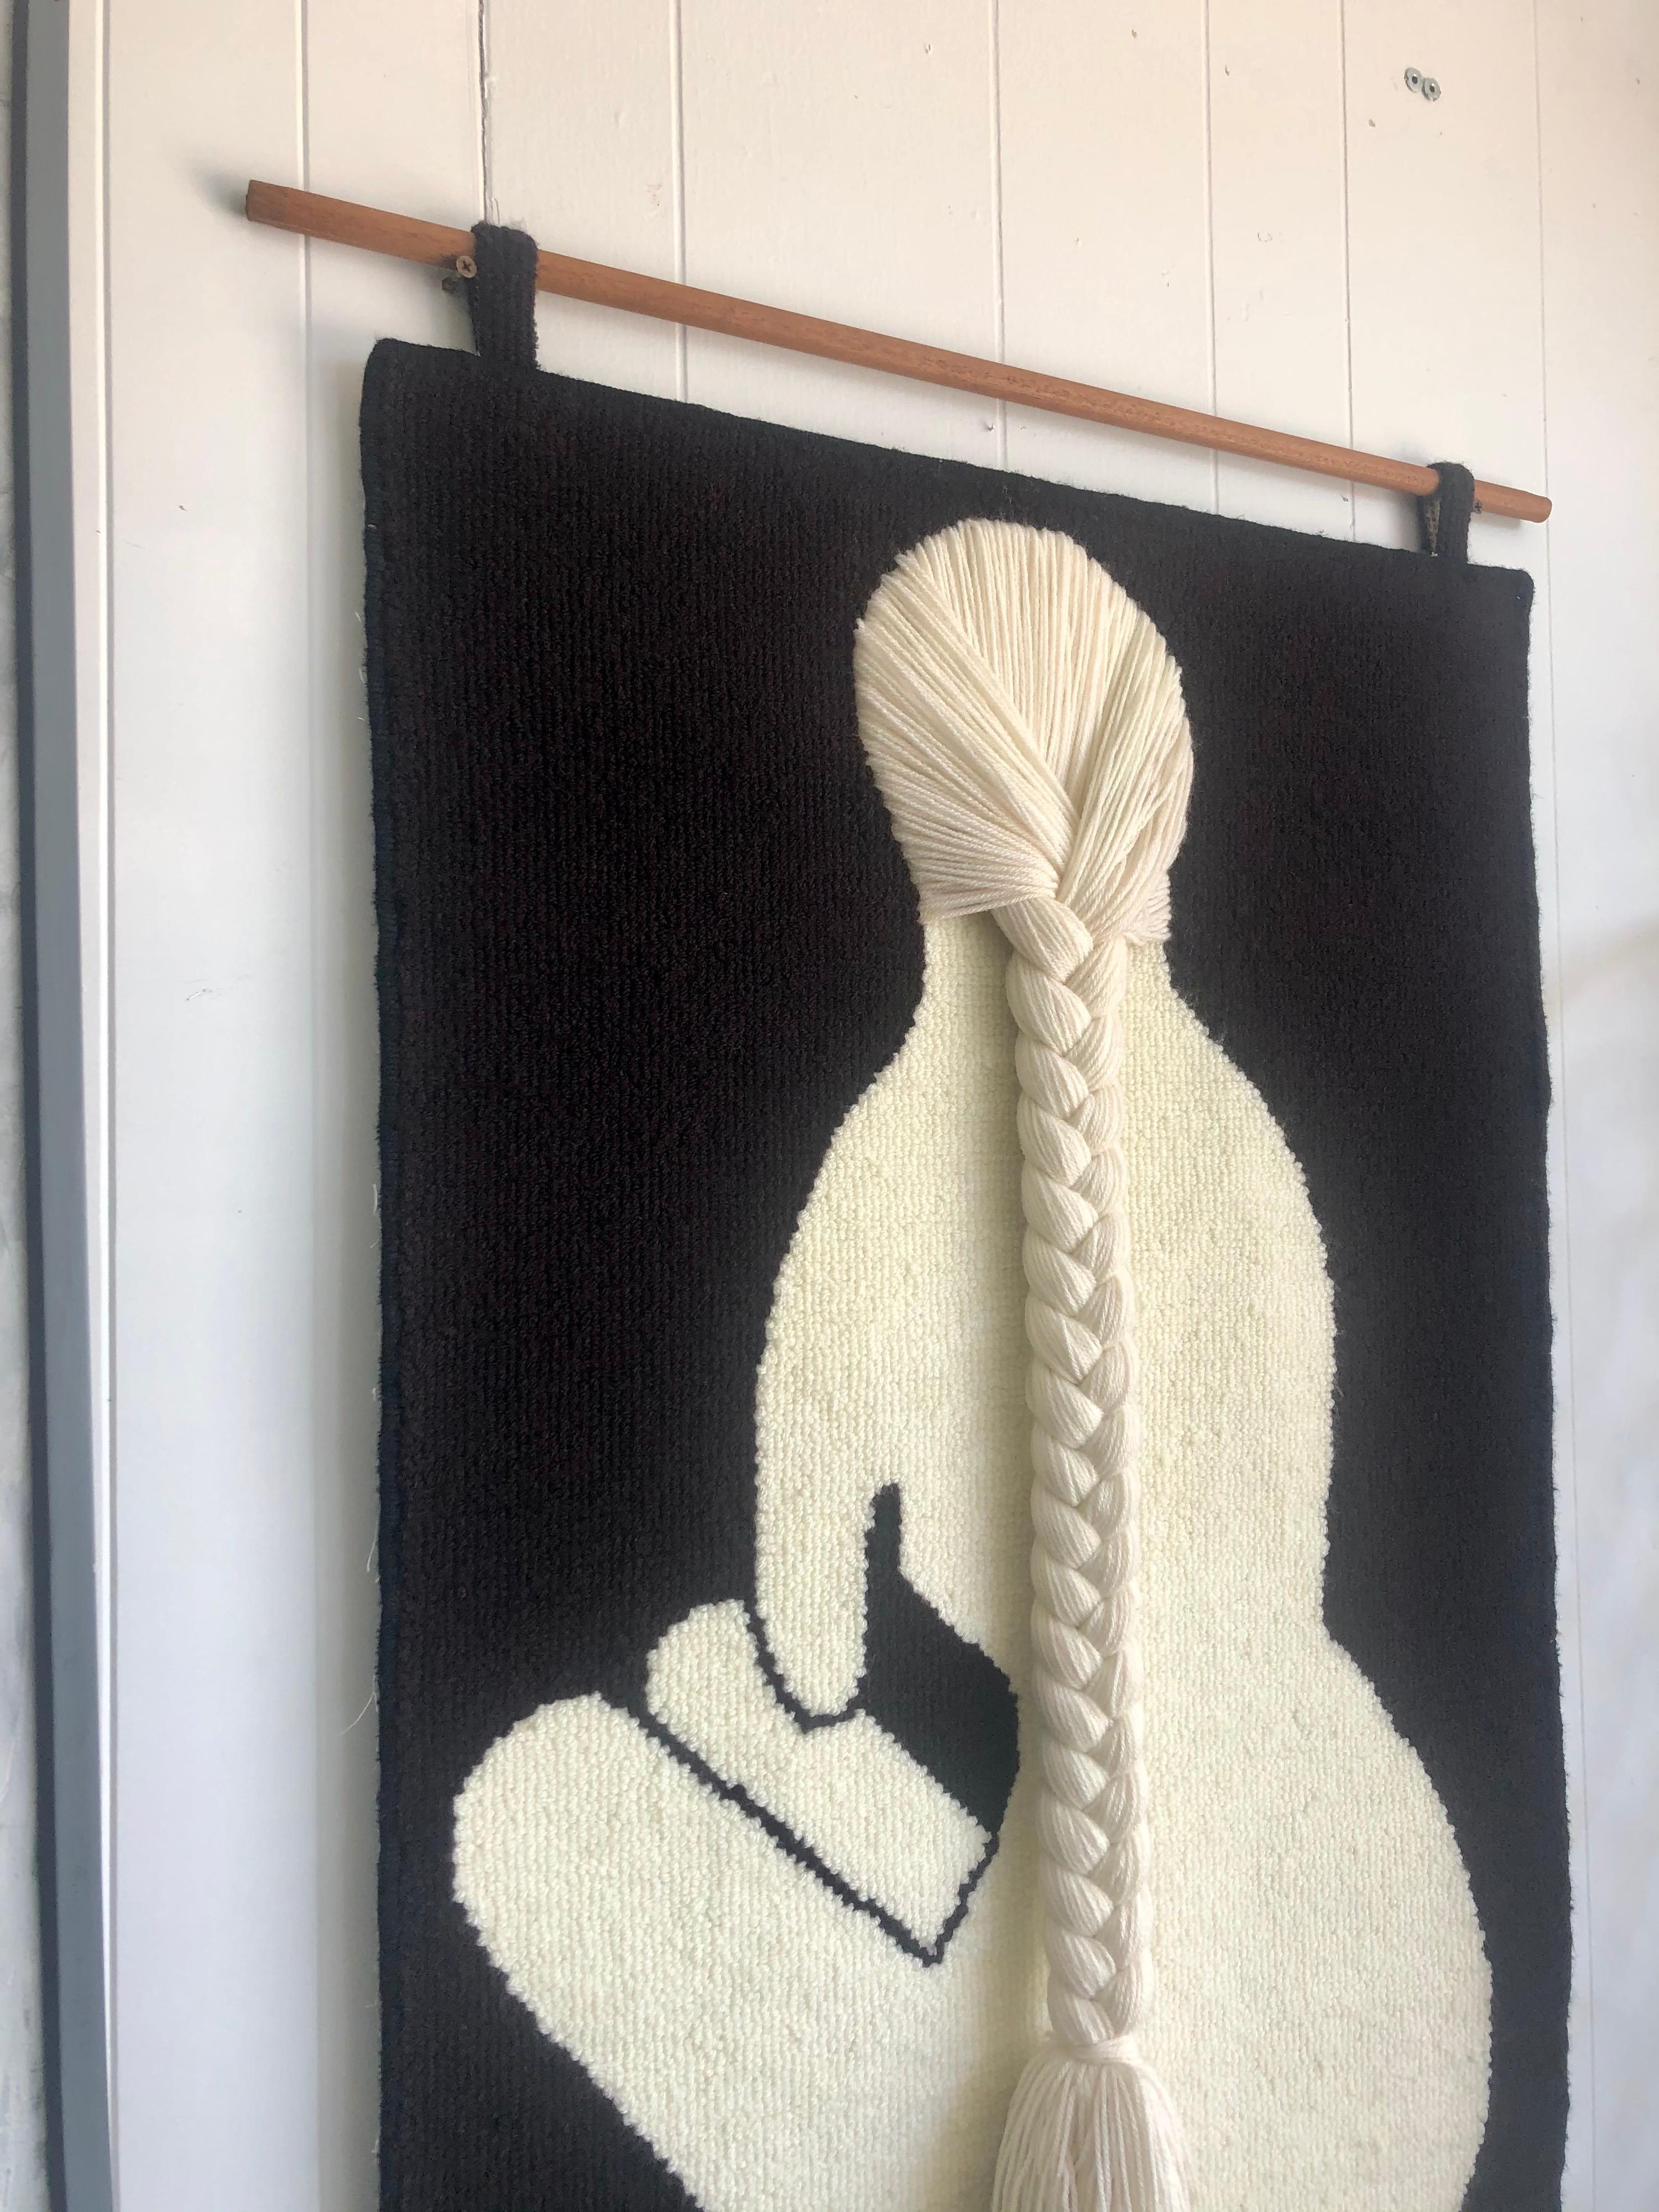 Hand-Woven Vintage 1970s Black and White Woven Wall Hanging